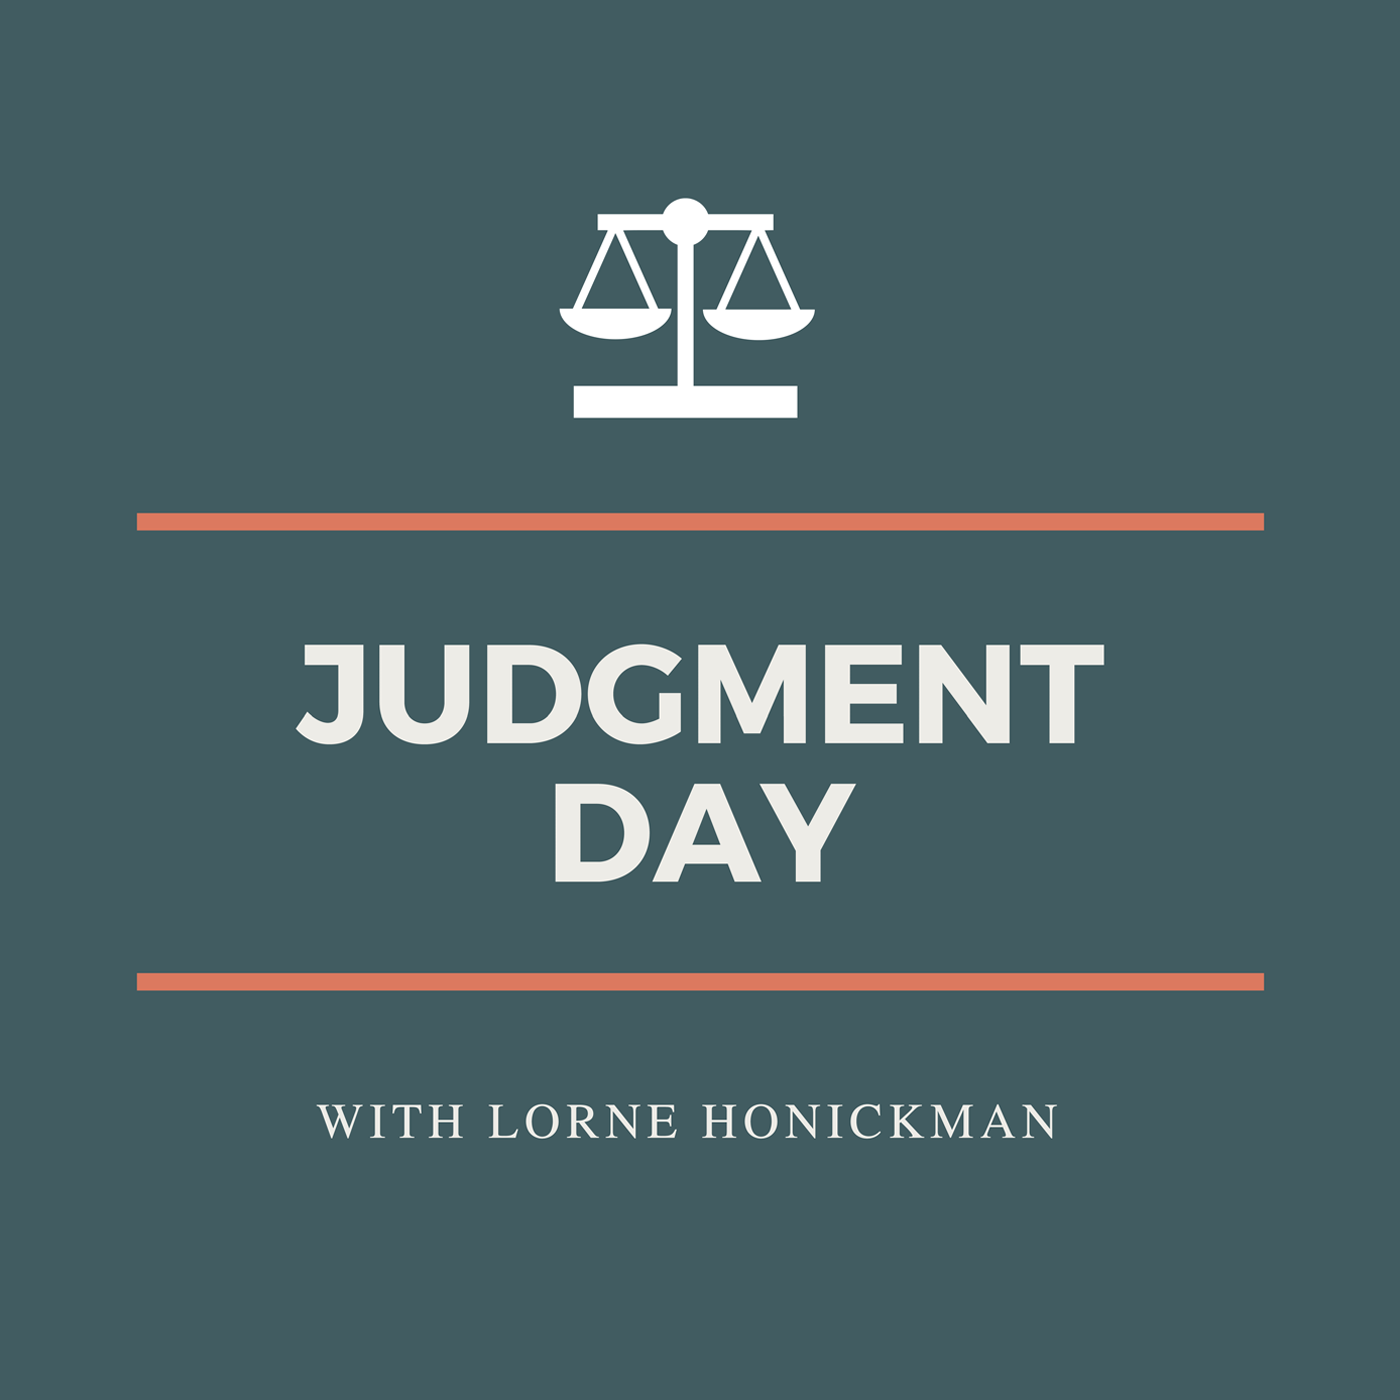 Judgment Day with Lorne Honickman